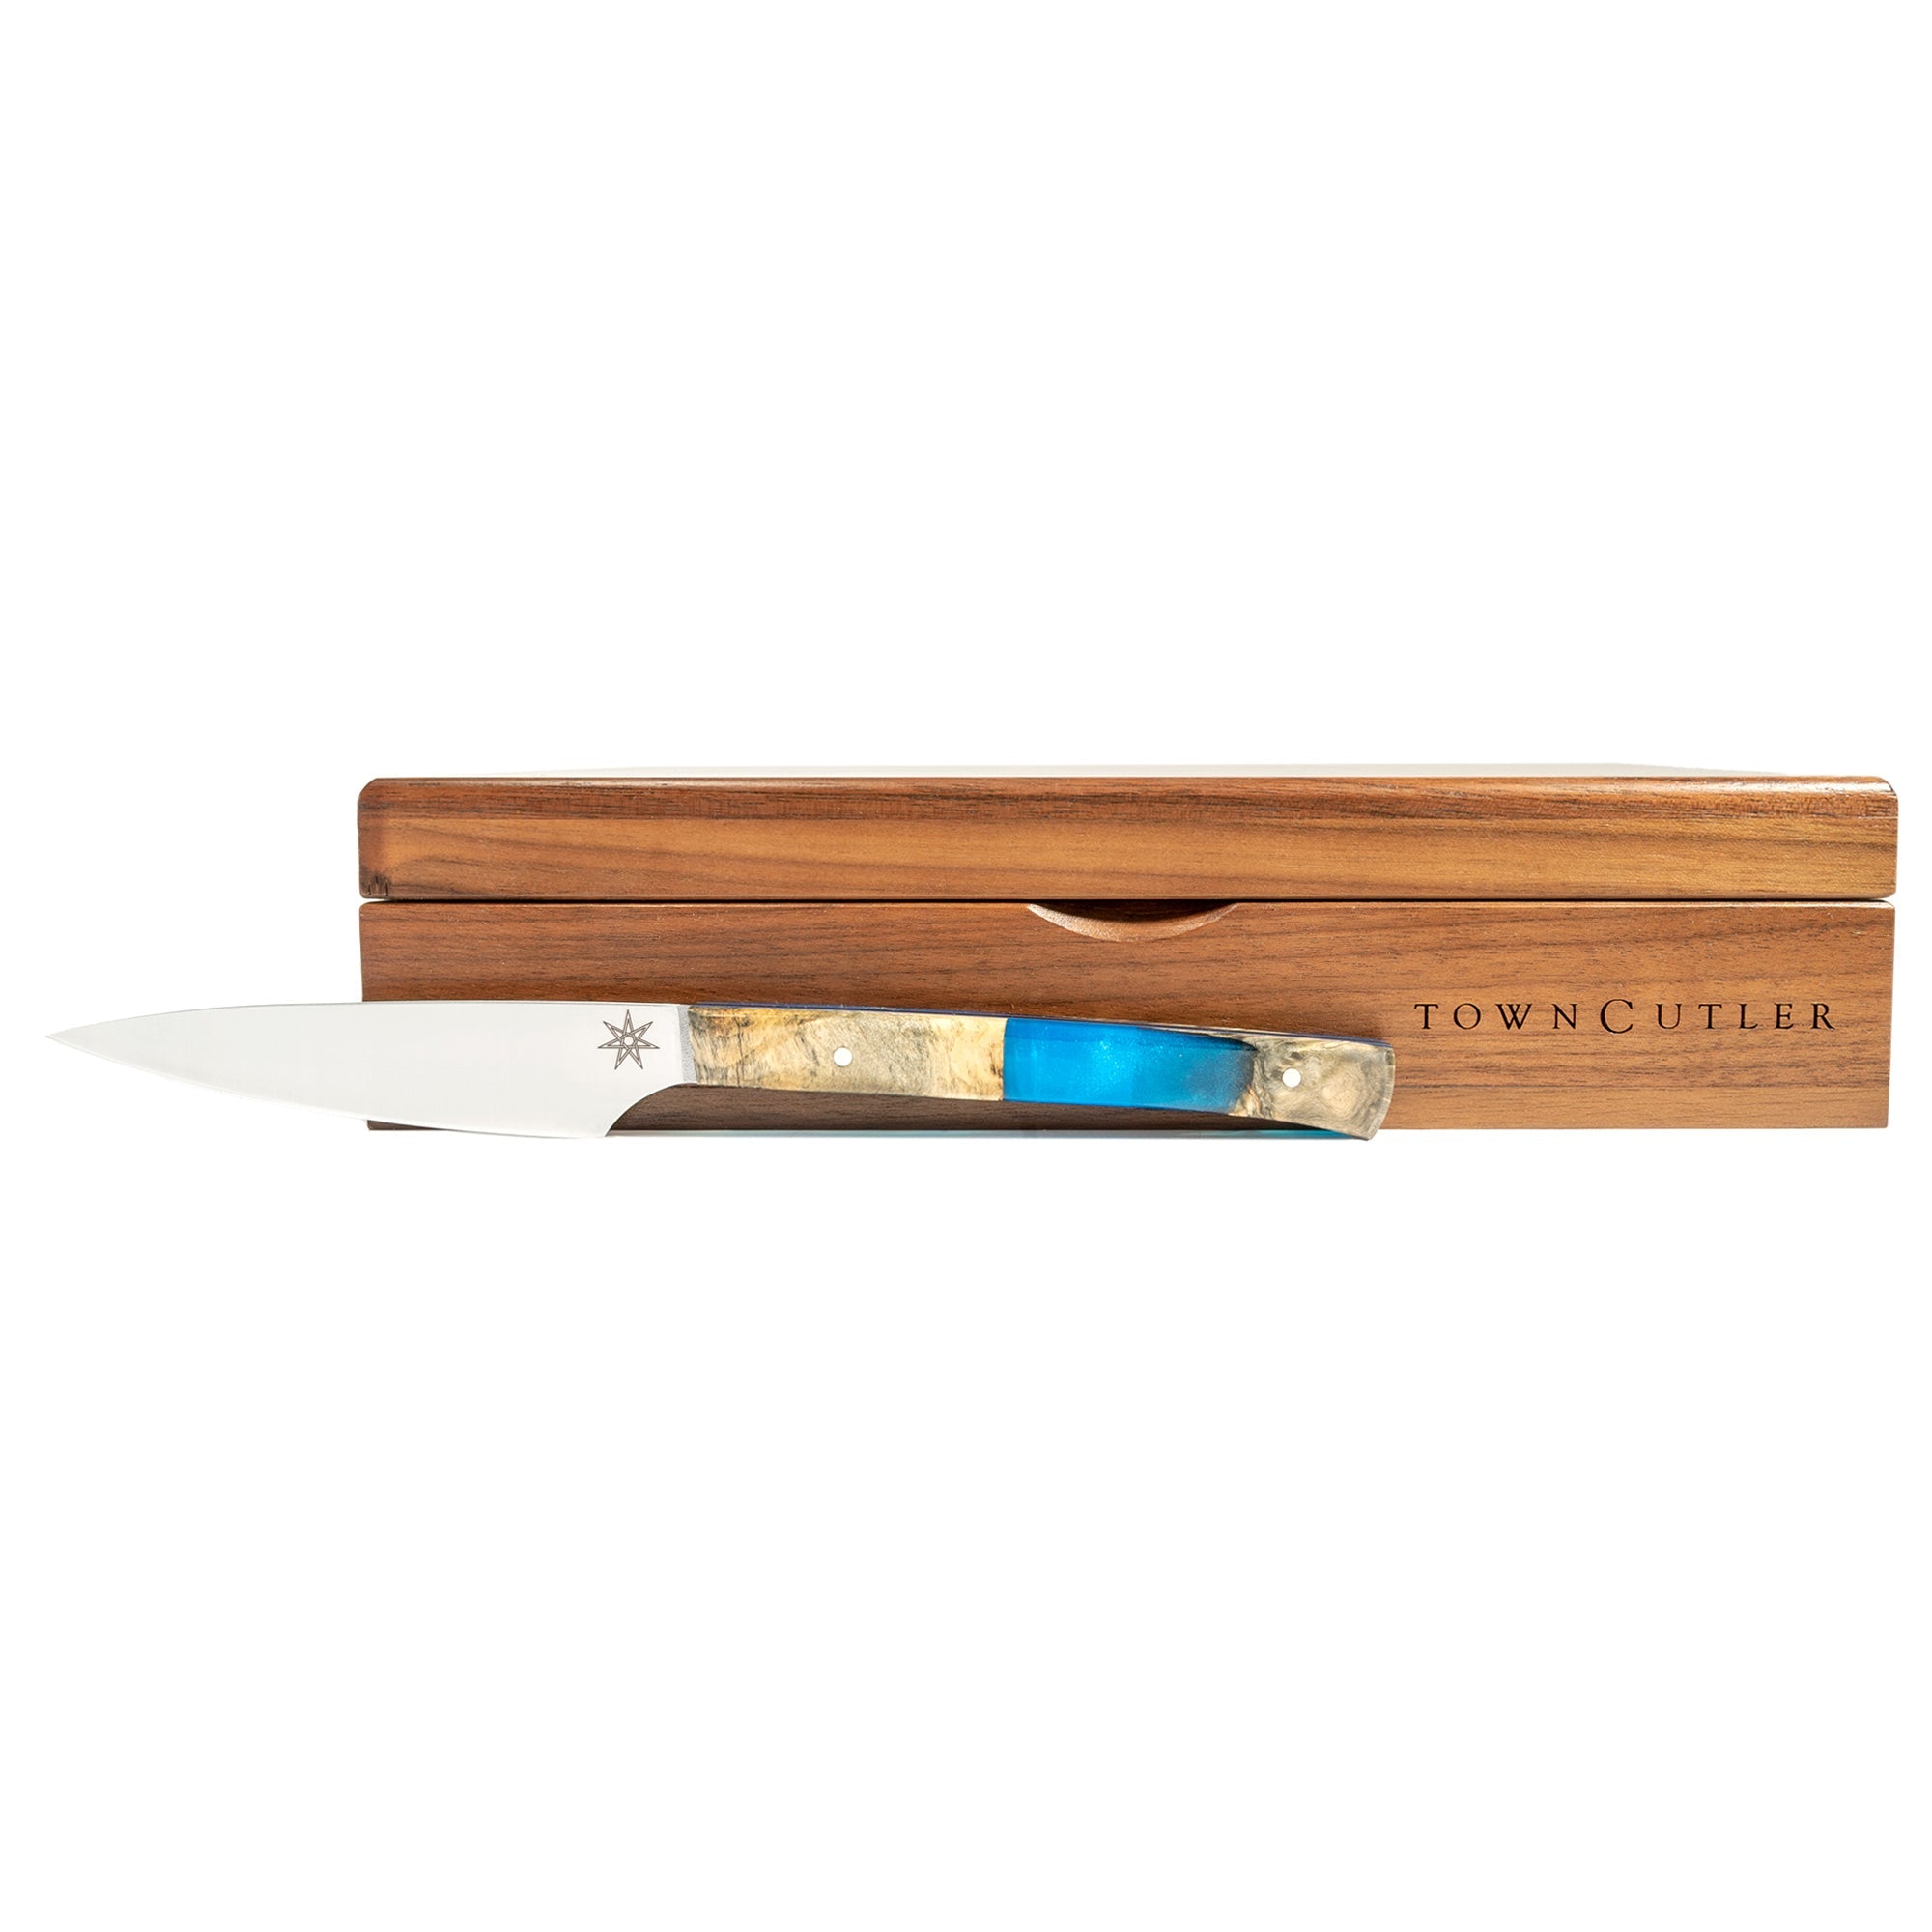 Town Cutler Tahoe Bliss Steak Knife shown with Walnut storage box for set of four steak knives.